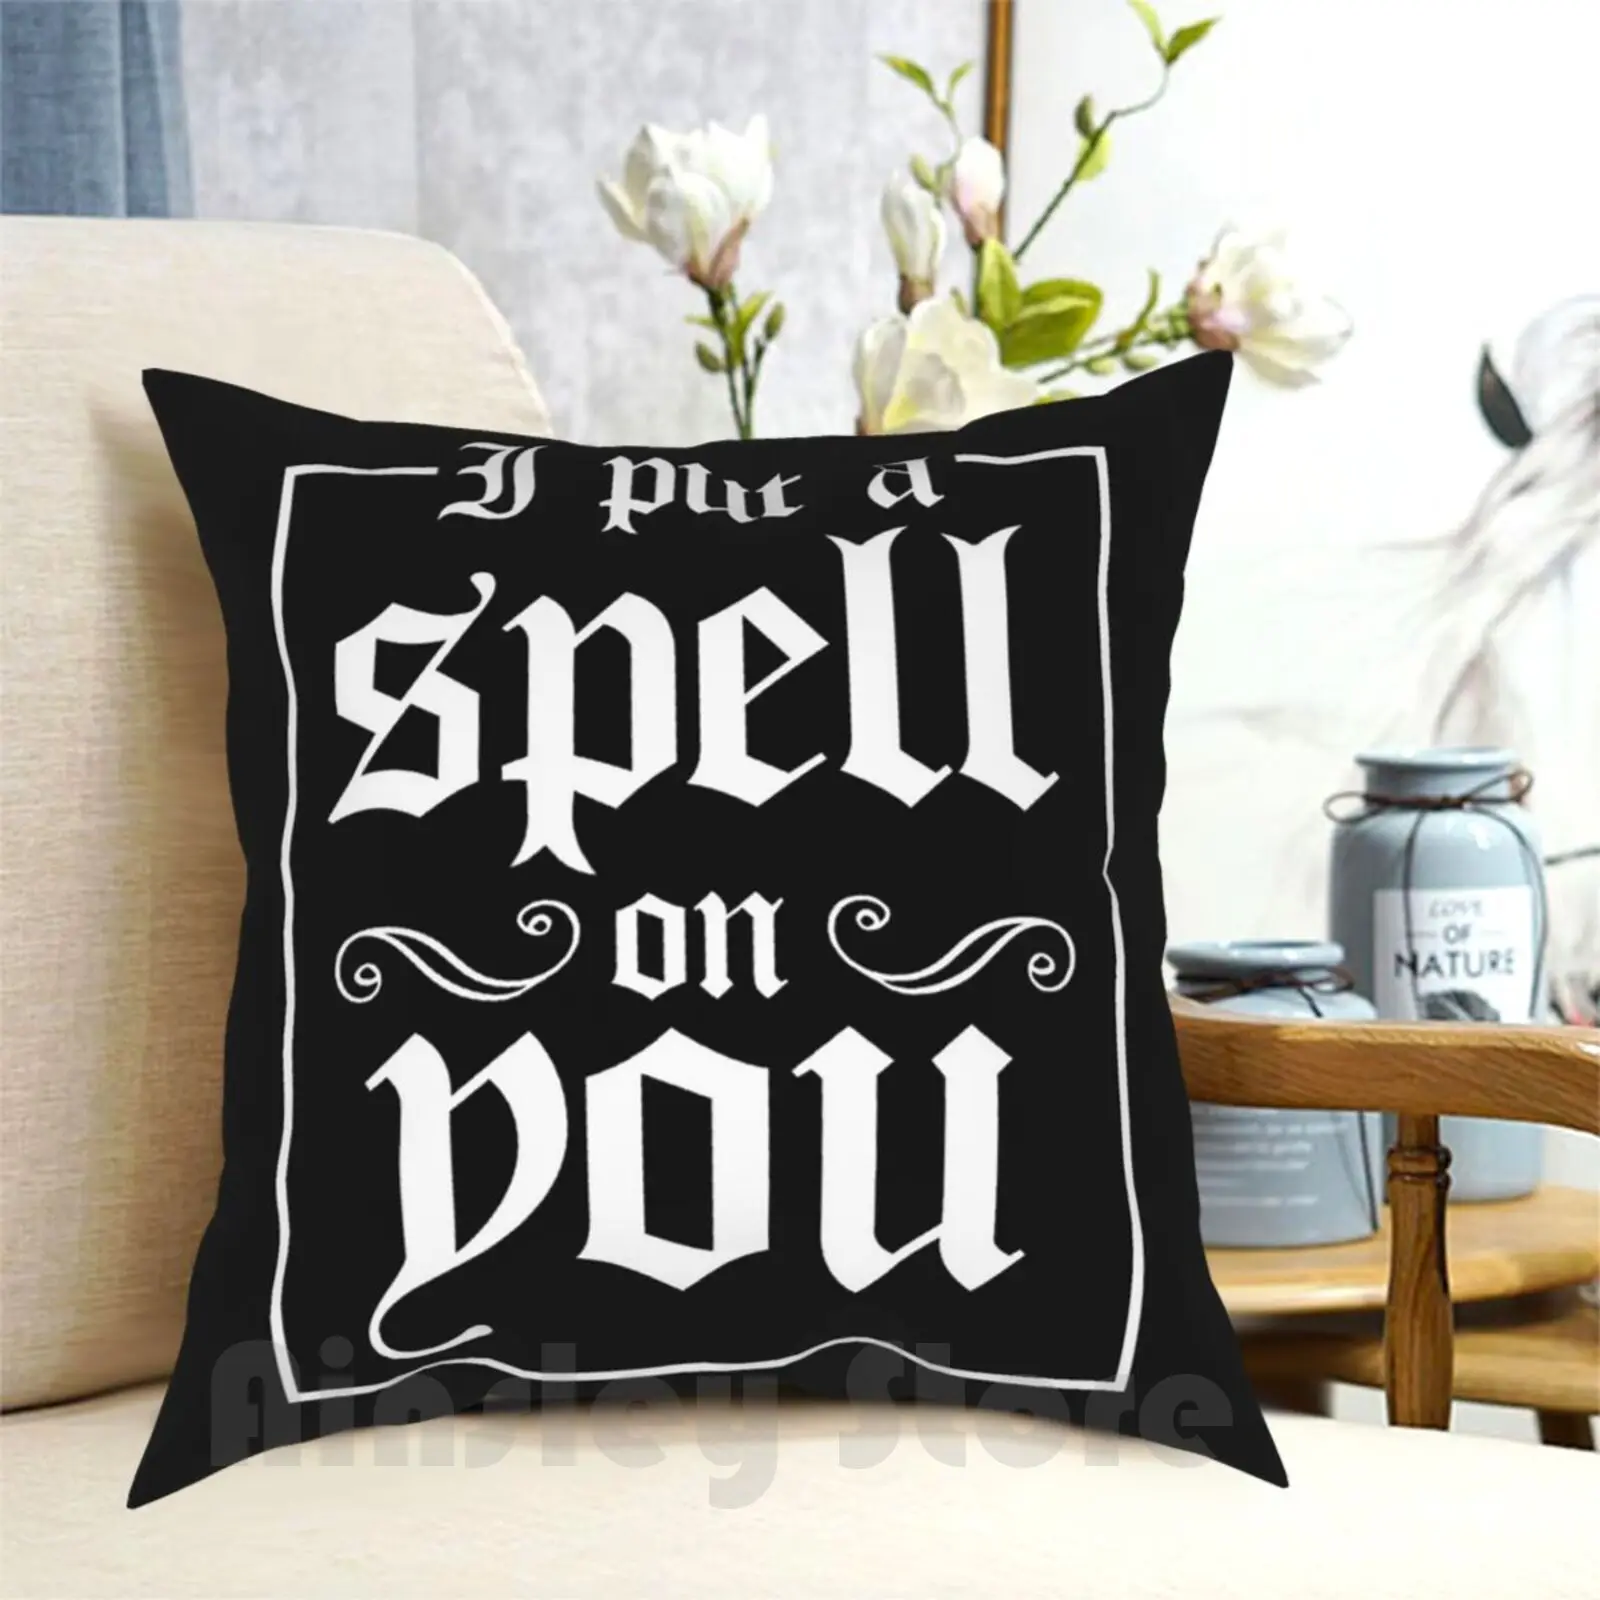 

I Put A Spell On You Pillow Case Printed Home Soft DIY Pillow cover I Put A Spell On You Halloween Witch Witches Spell